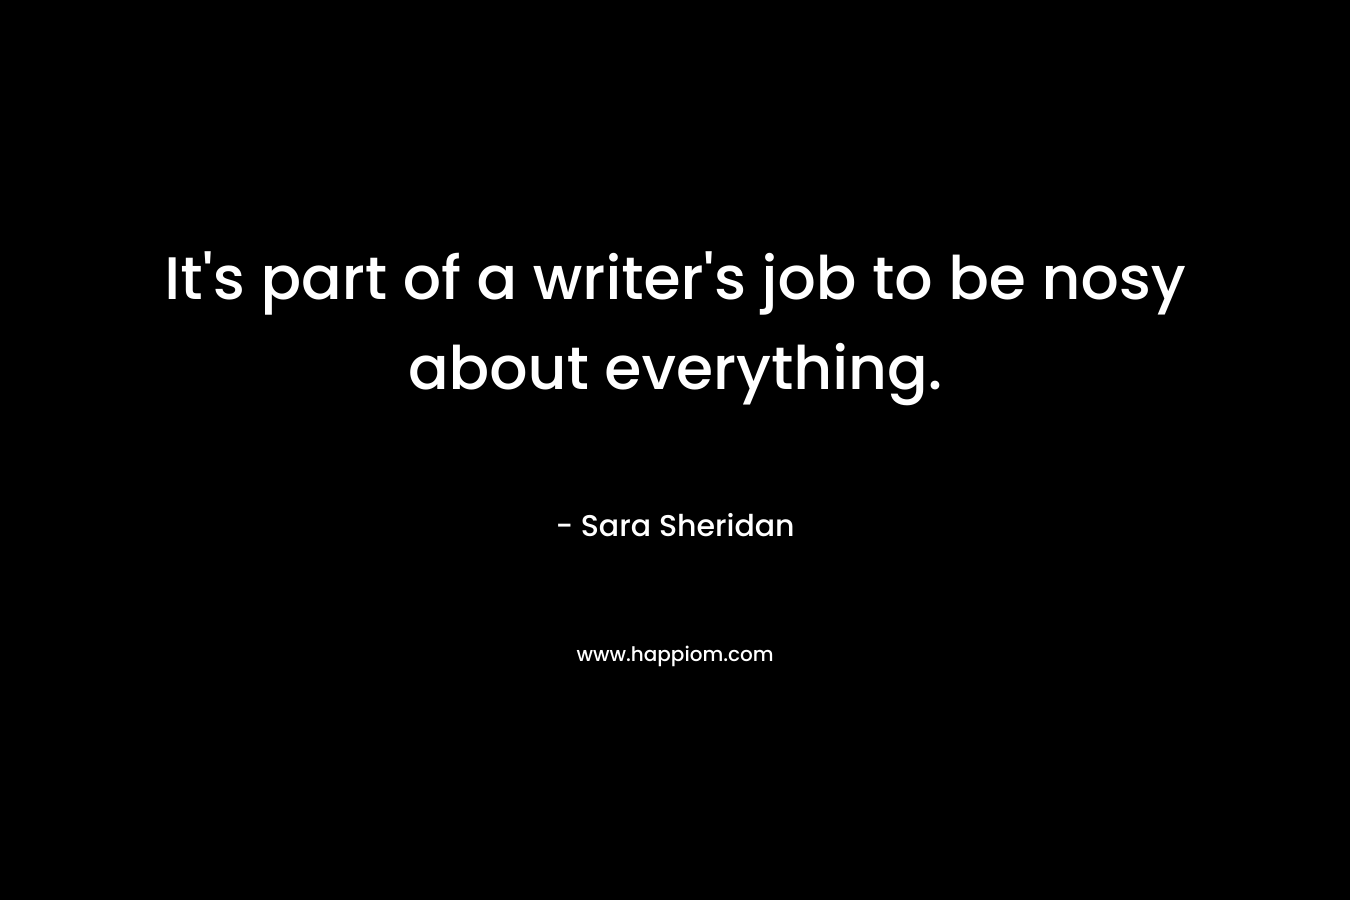 It’s part of a writer’s job to be nosy about everything. – Sara Sheridan